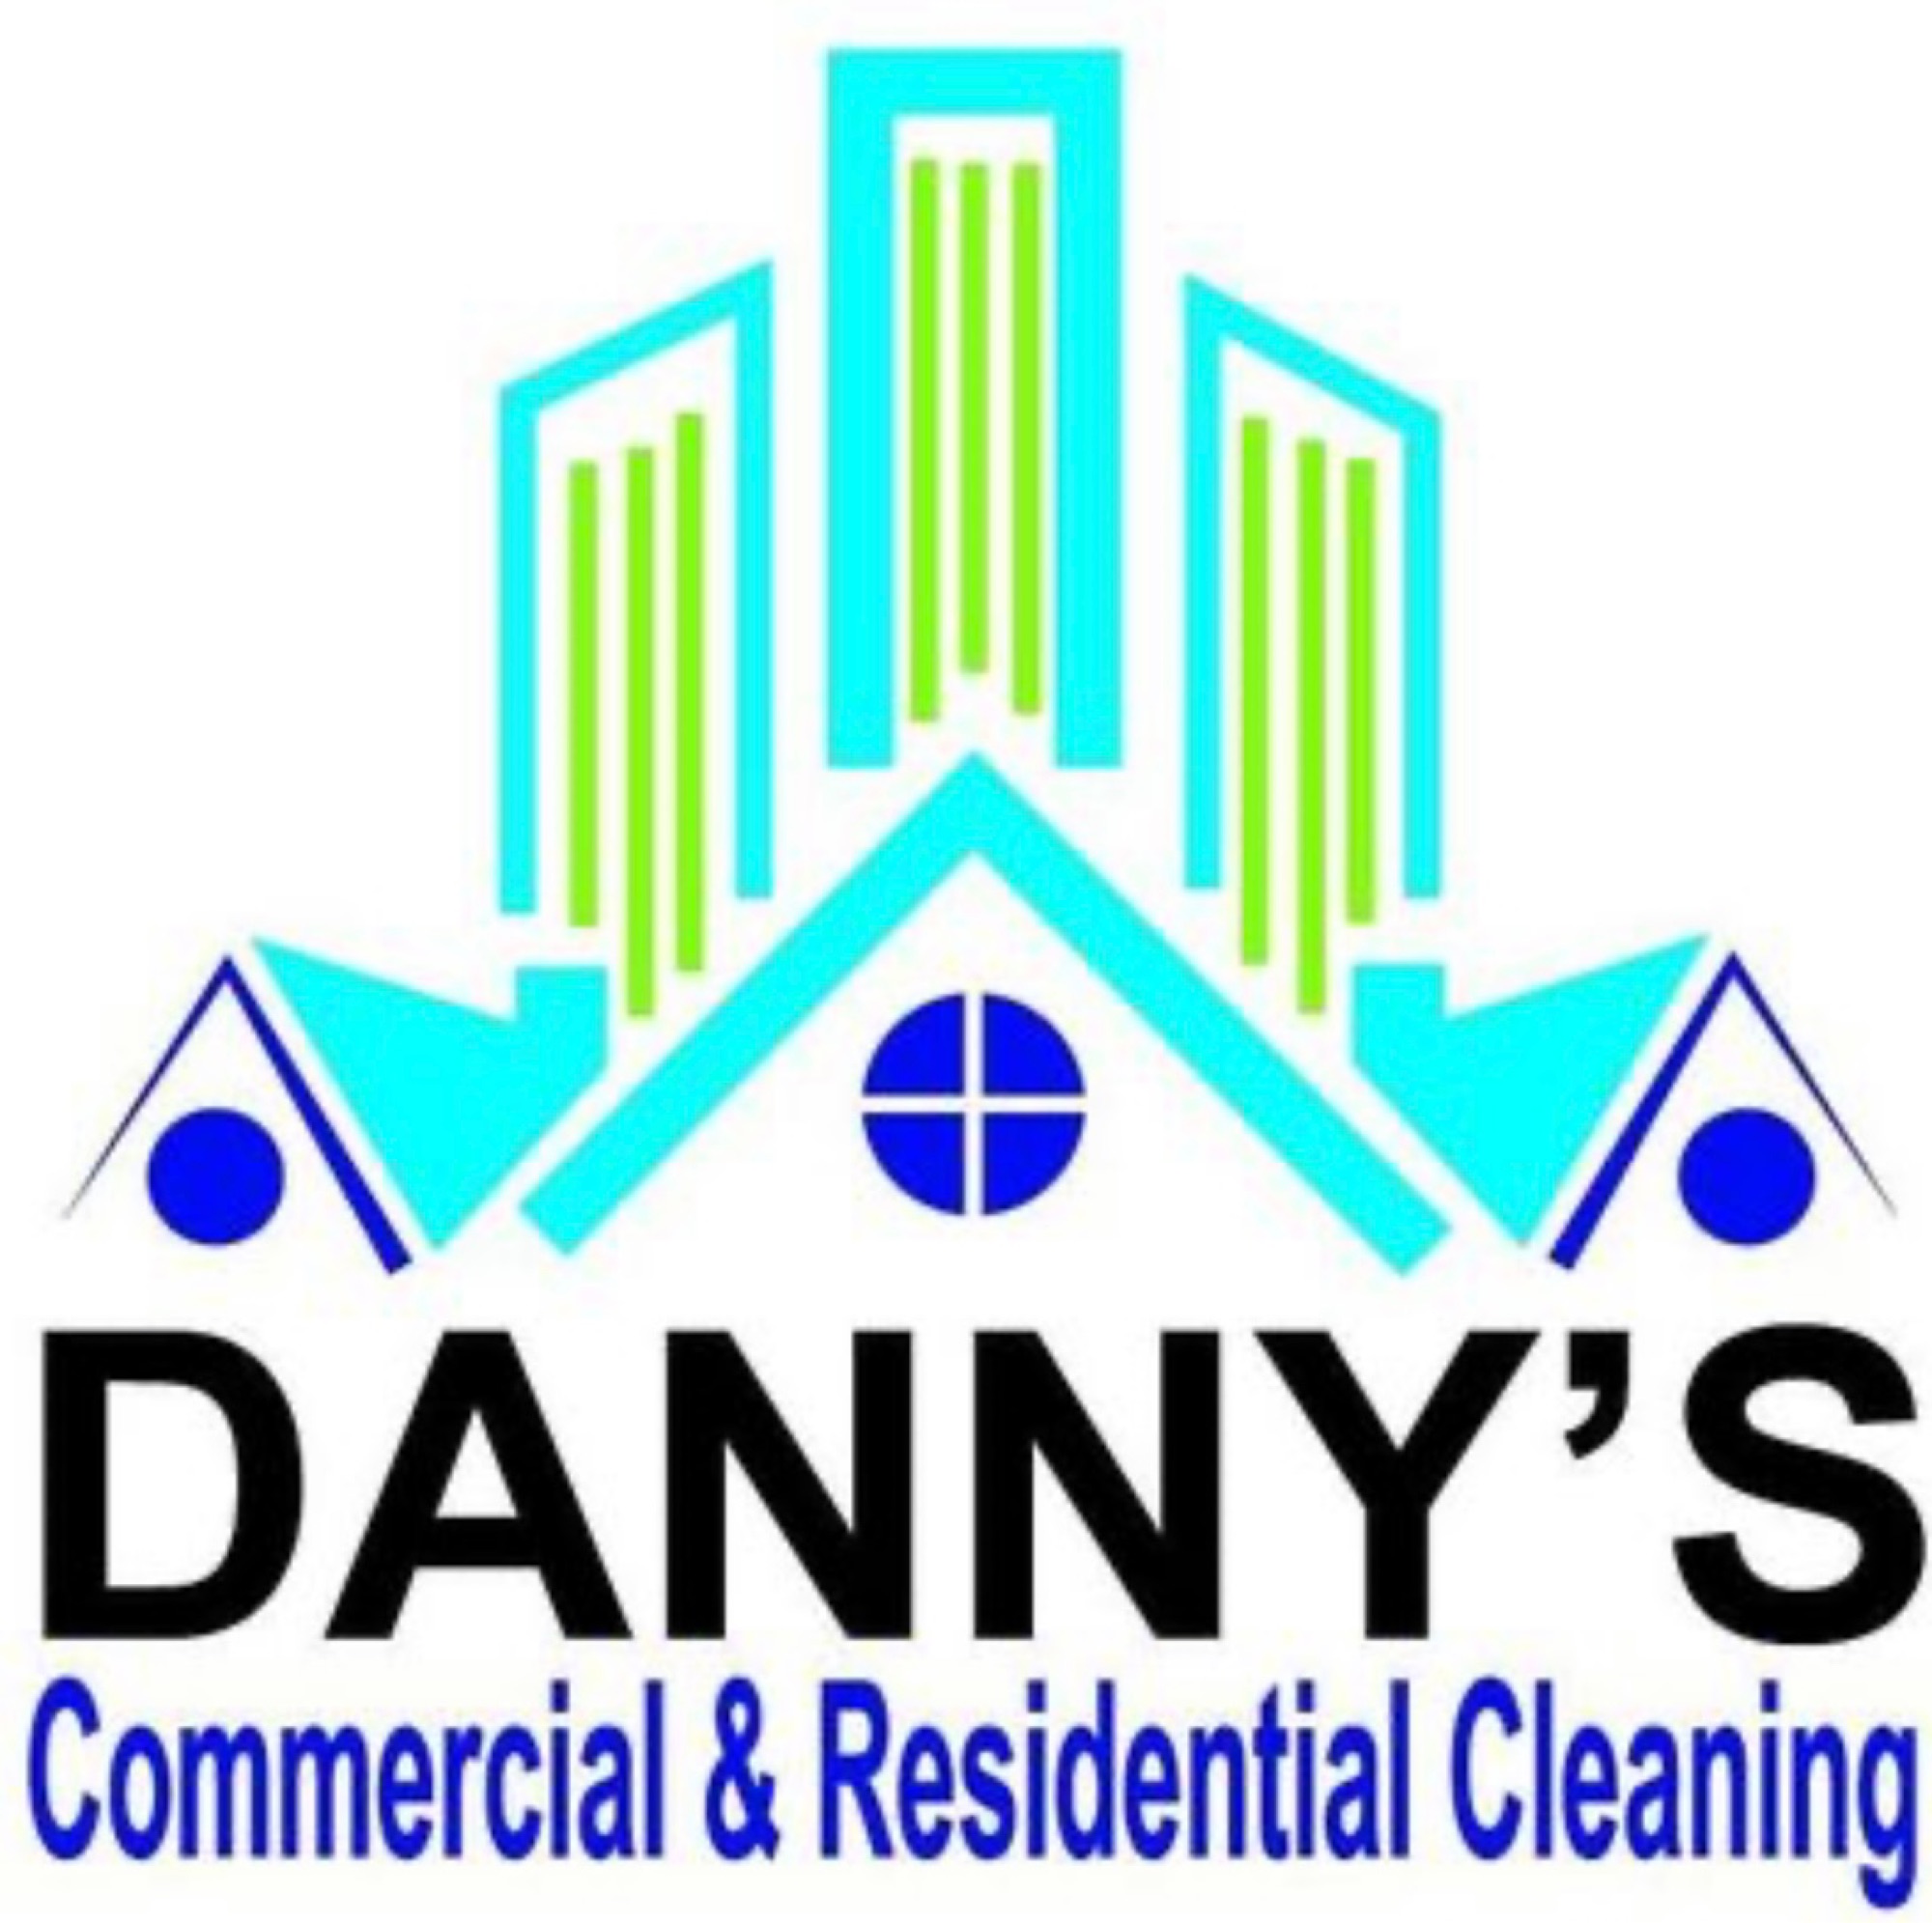 Danny's Commercial & Recidencial Cleaning, LLC Logo